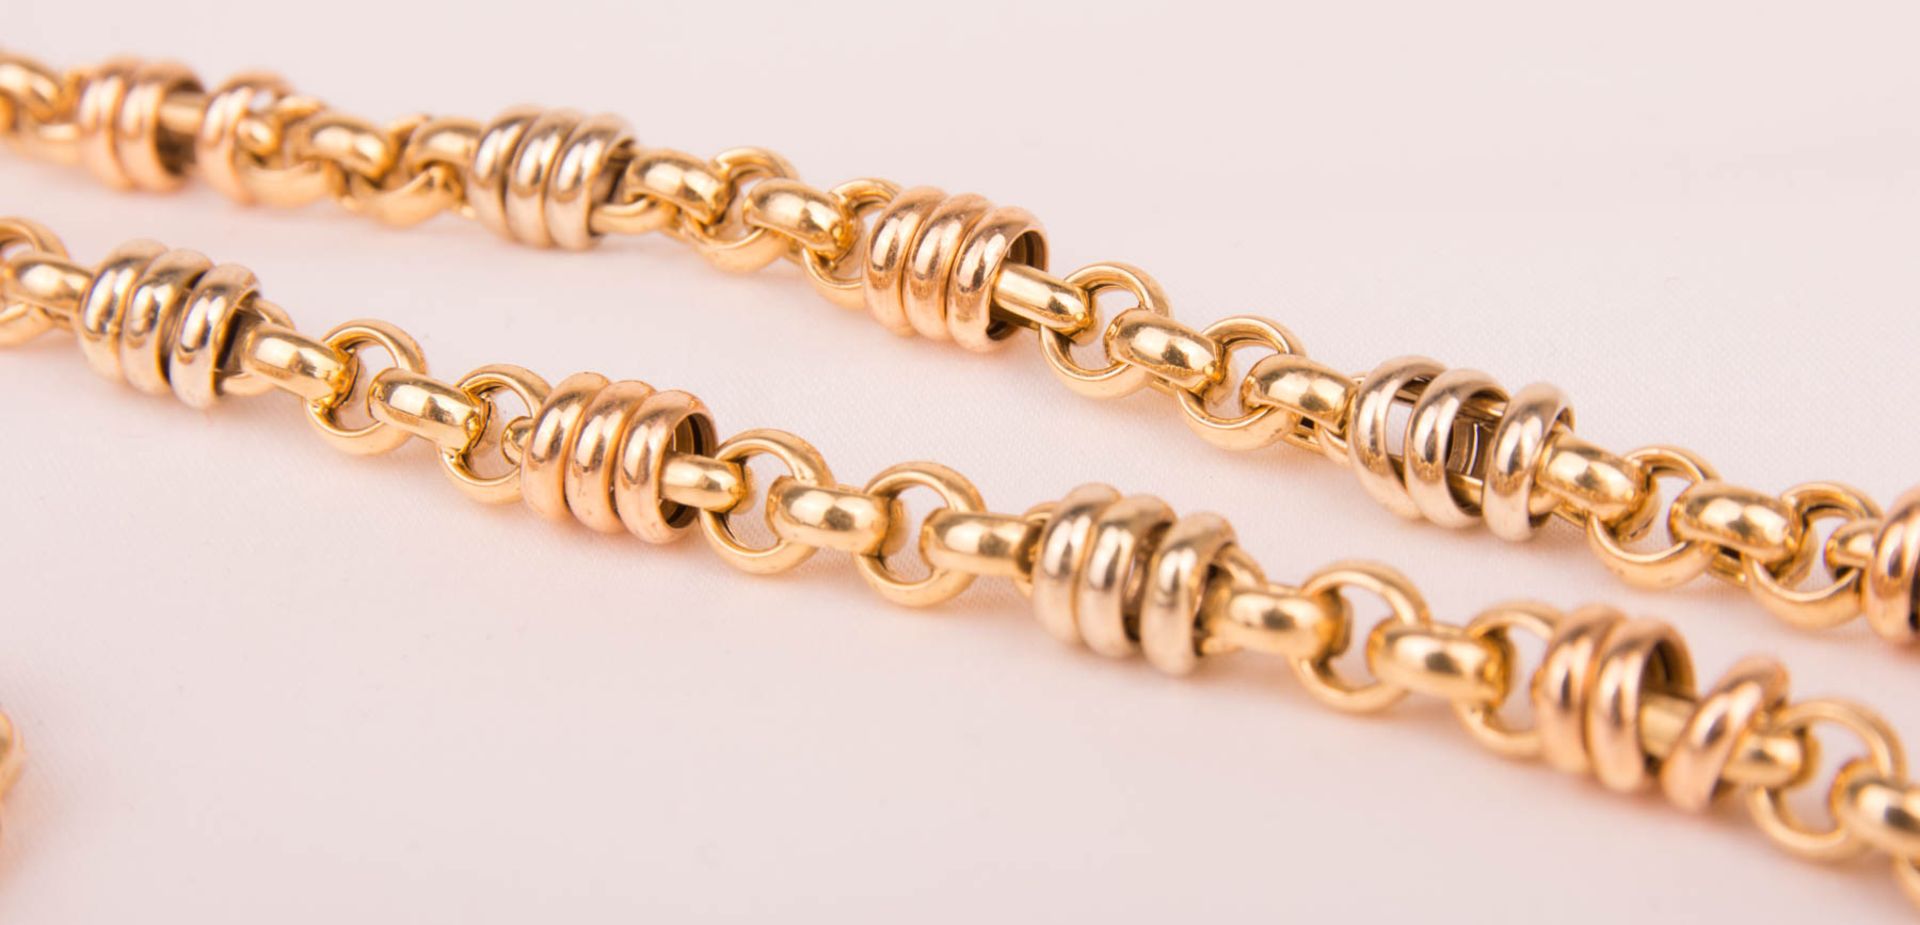 Necklace and matching bracelet, 750 yellow gold. - Image 2 of 4